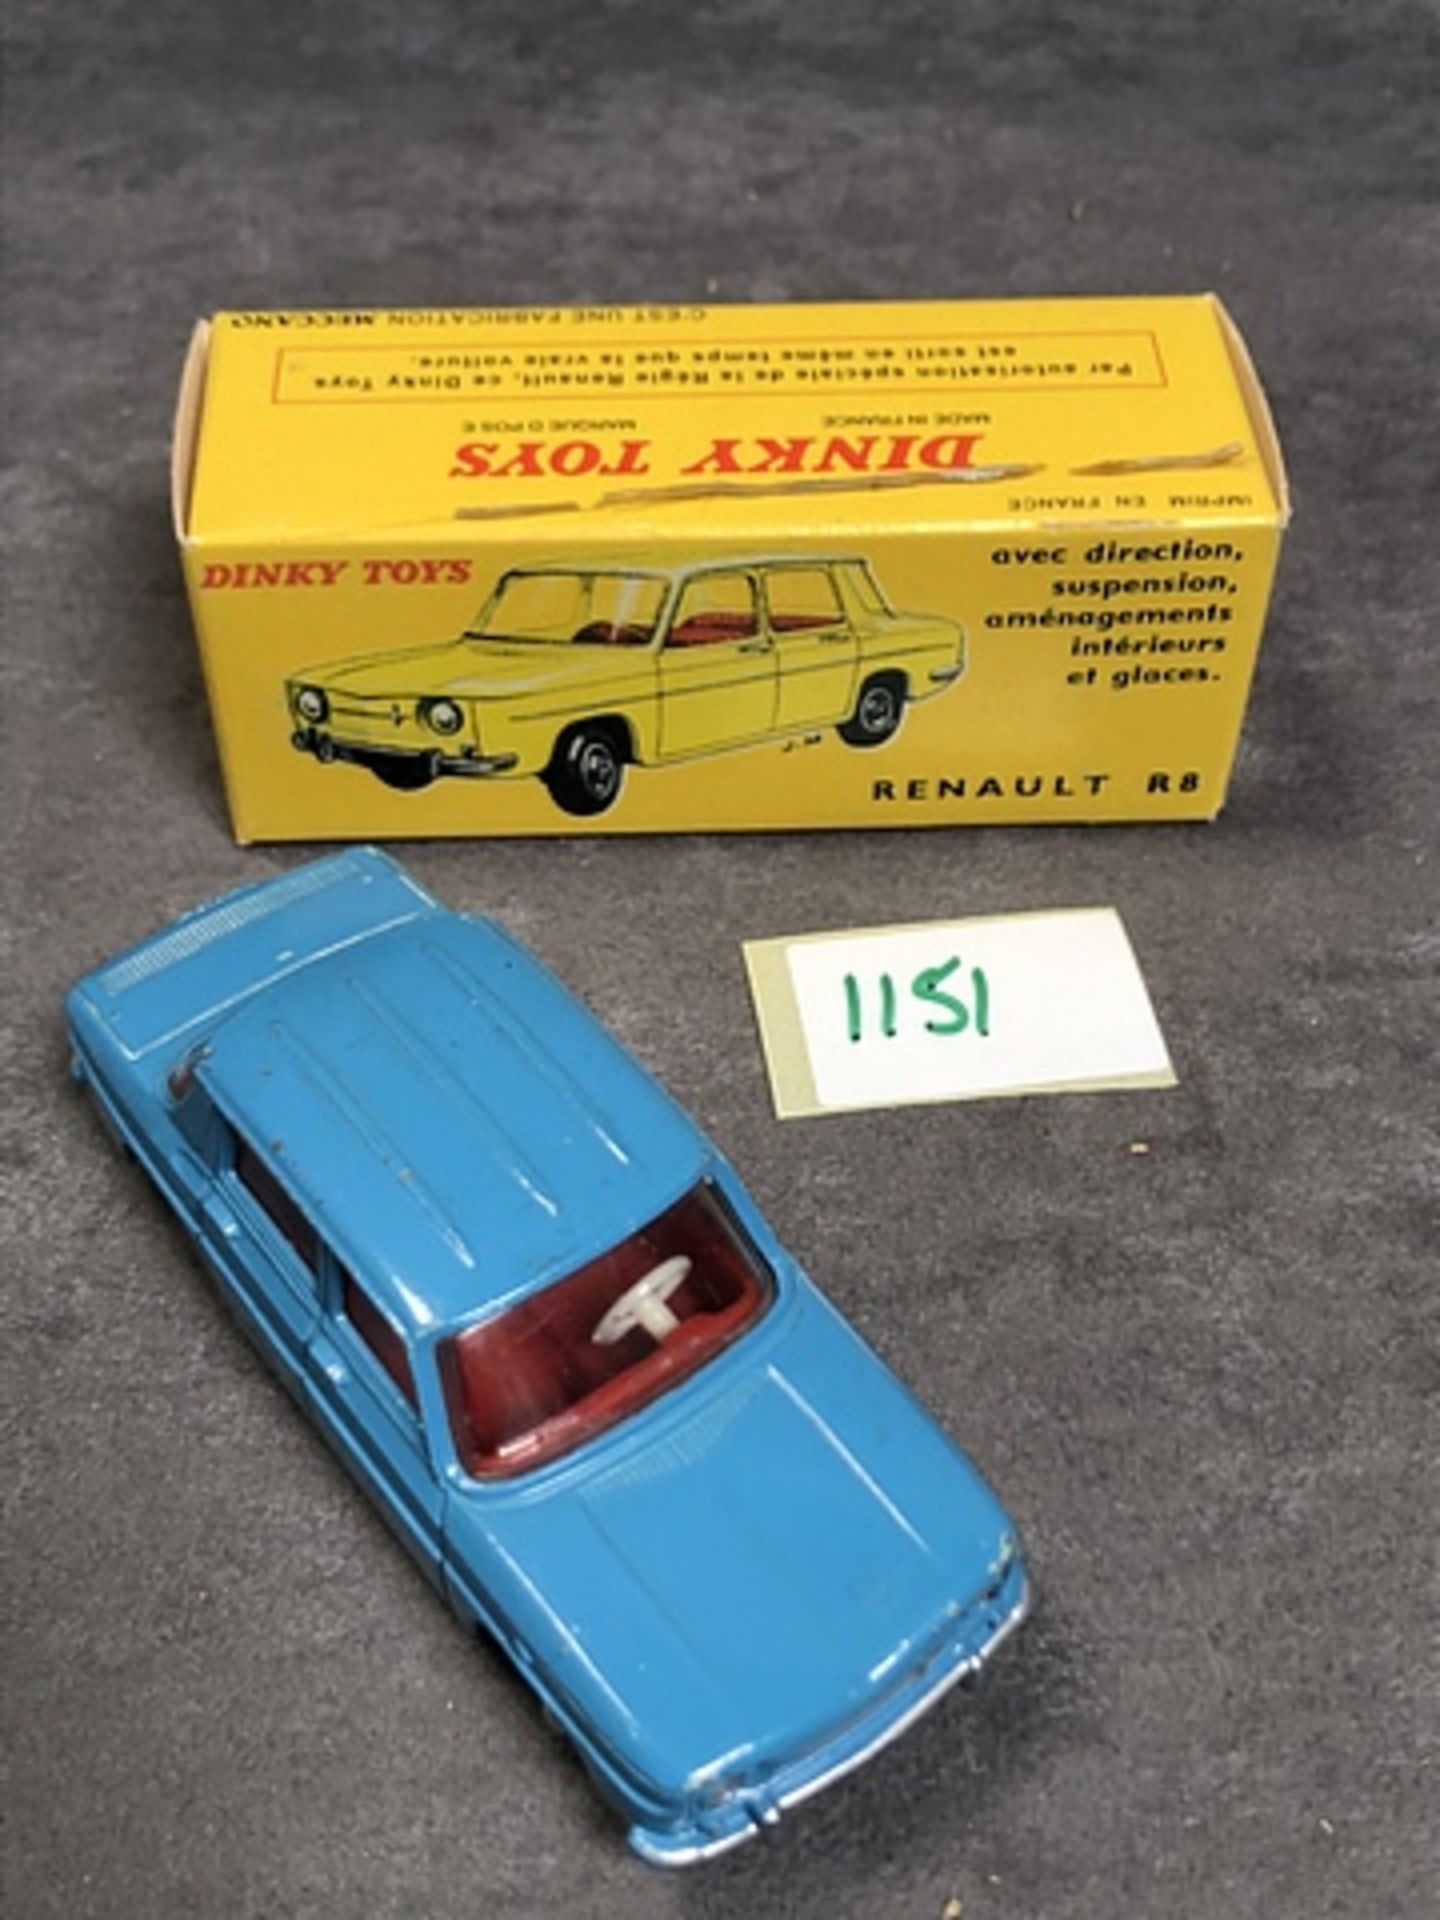 Dinky Toys Diecast #517 Renault R8 Mint condtion model with a repro box